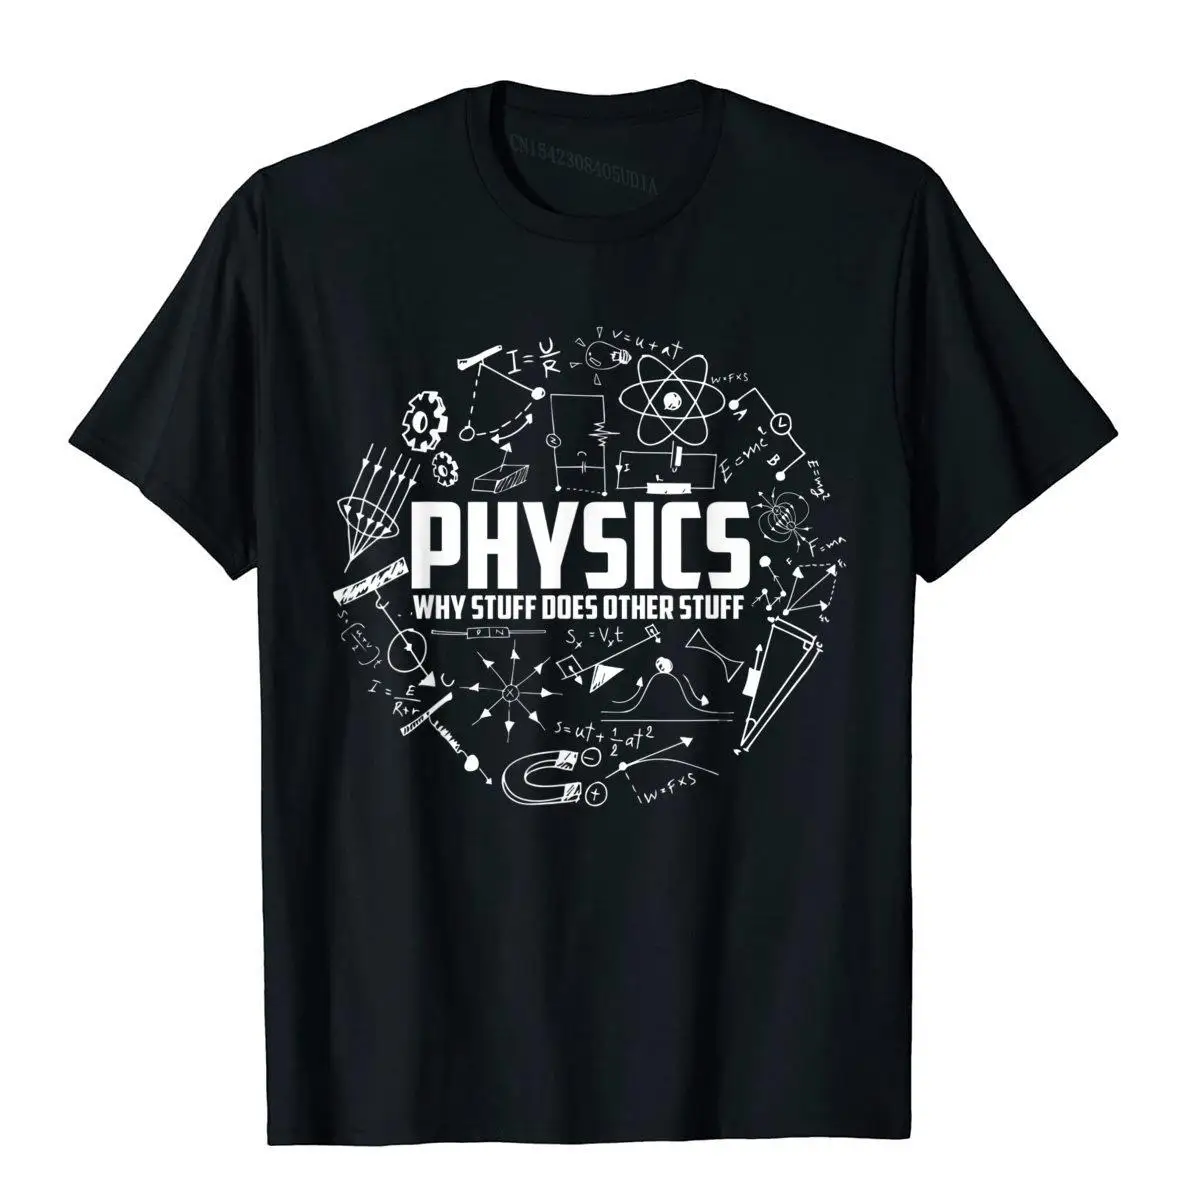 Physics Why Stuff Does Other Stuff Funny Physicists Gift T-Shirt Youthful Tees For Men Cotton Top T-Shirts Leisure Hip Hop